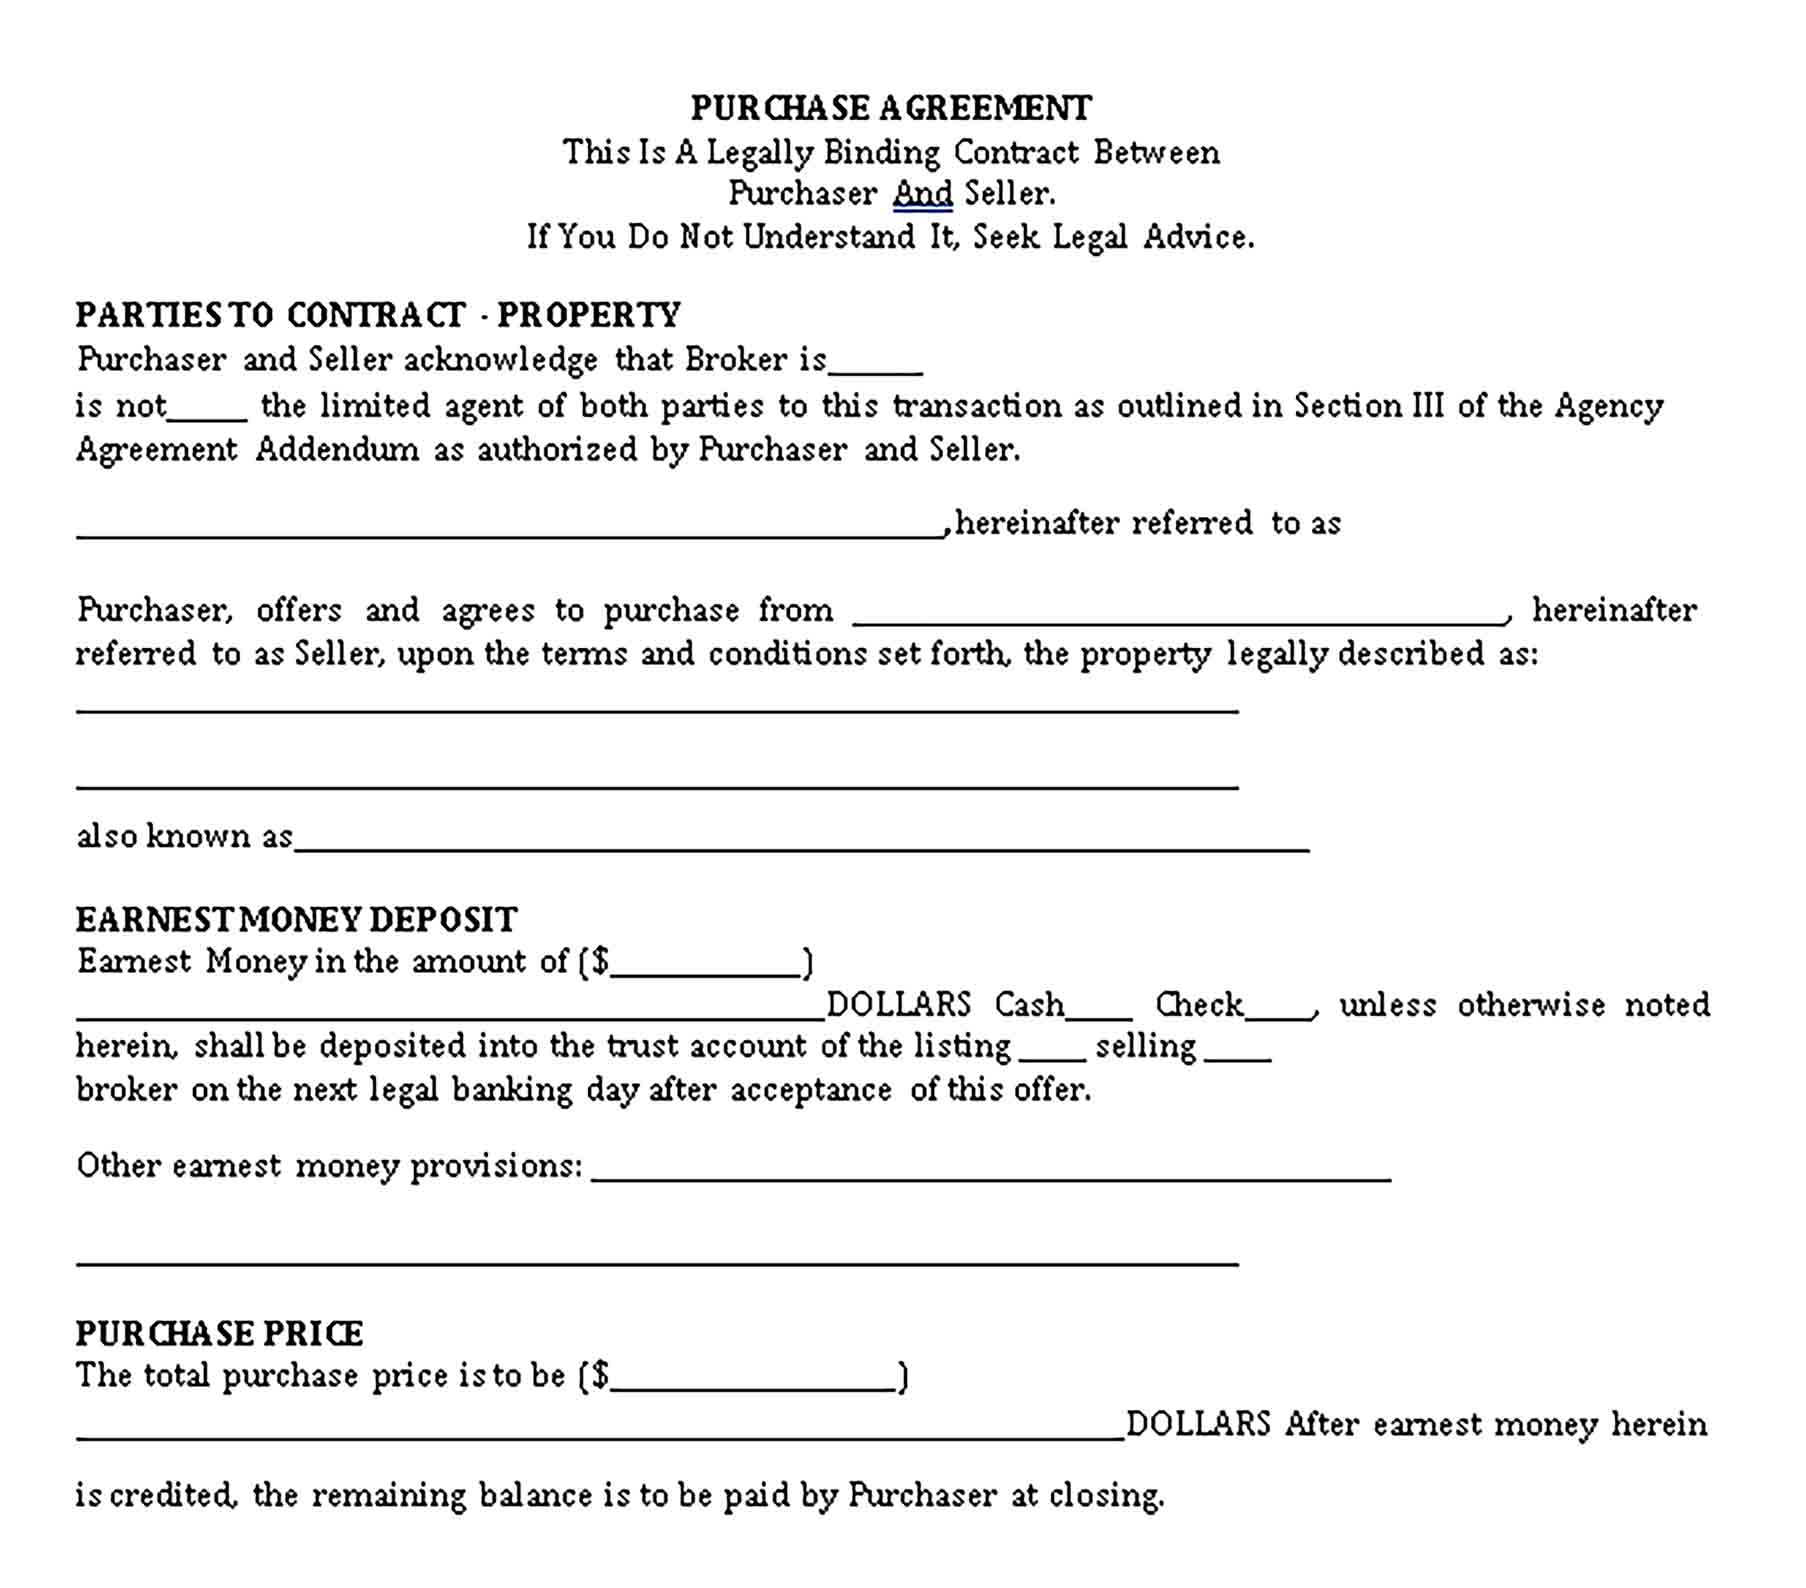 Templates purchase agreement1 Sample